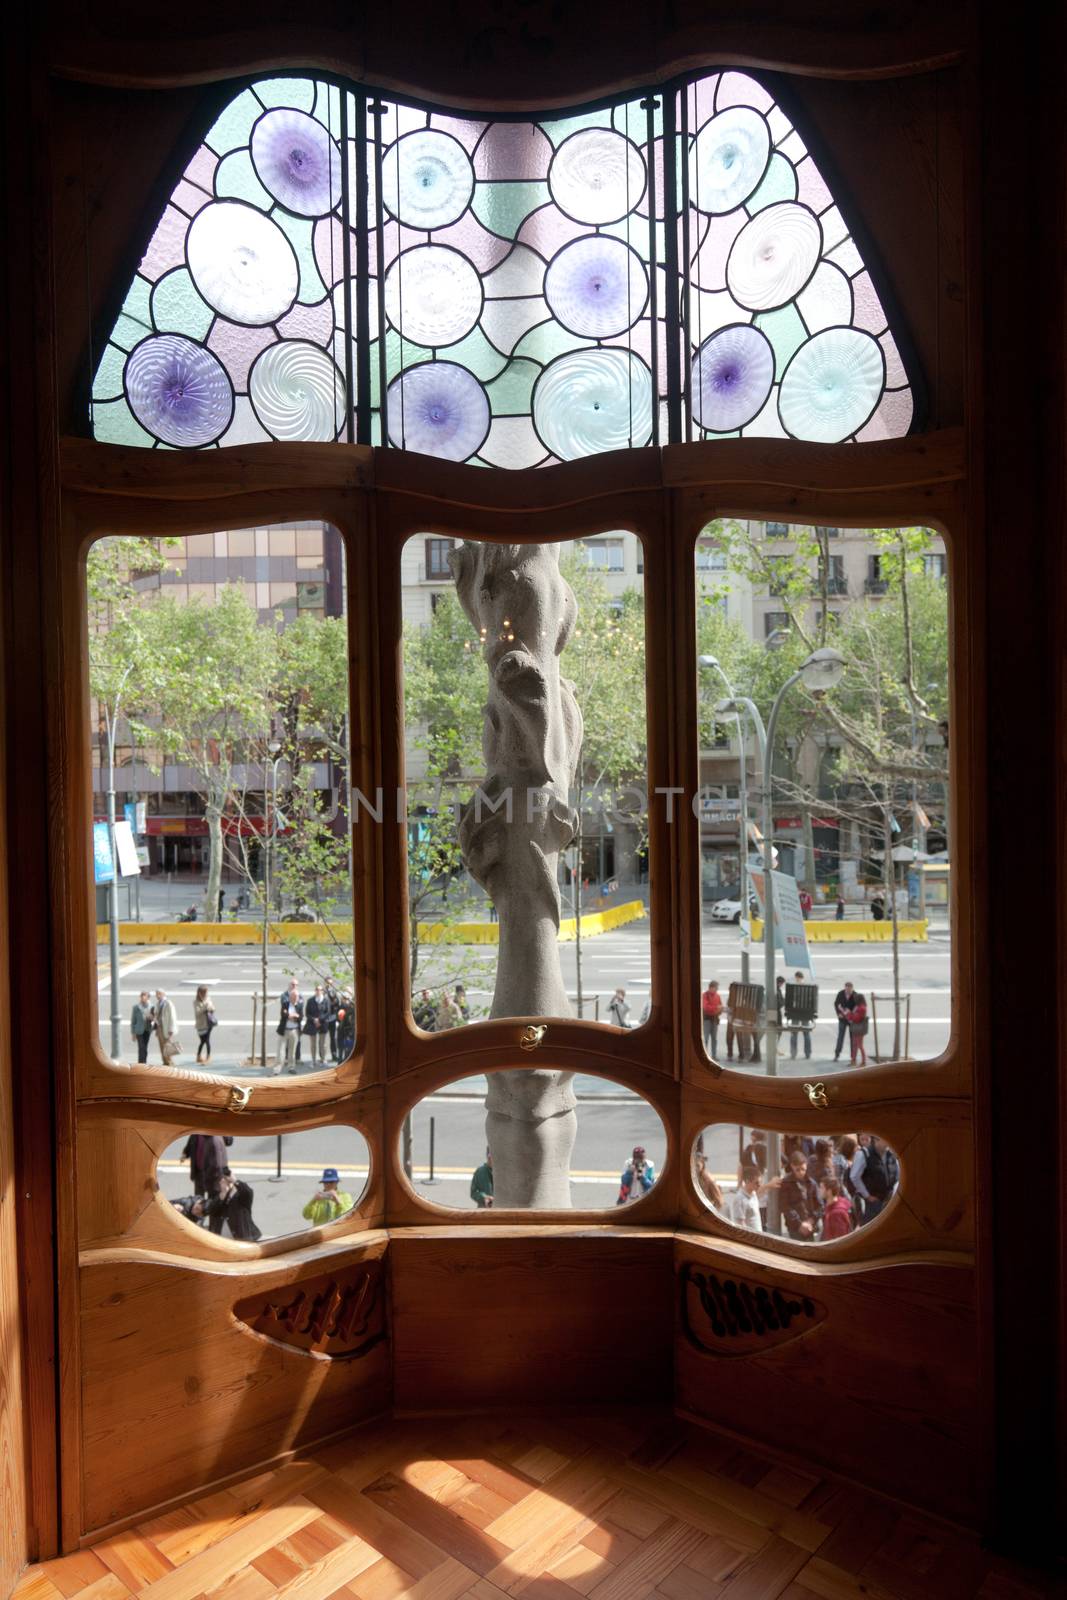 BARCELONA - APRIL 14: The house Casa Battlo (also could the house of bones) designed by Antoni Gaudi with his famous expressionistic style on April 14, 2012 in Barcelona, Spain